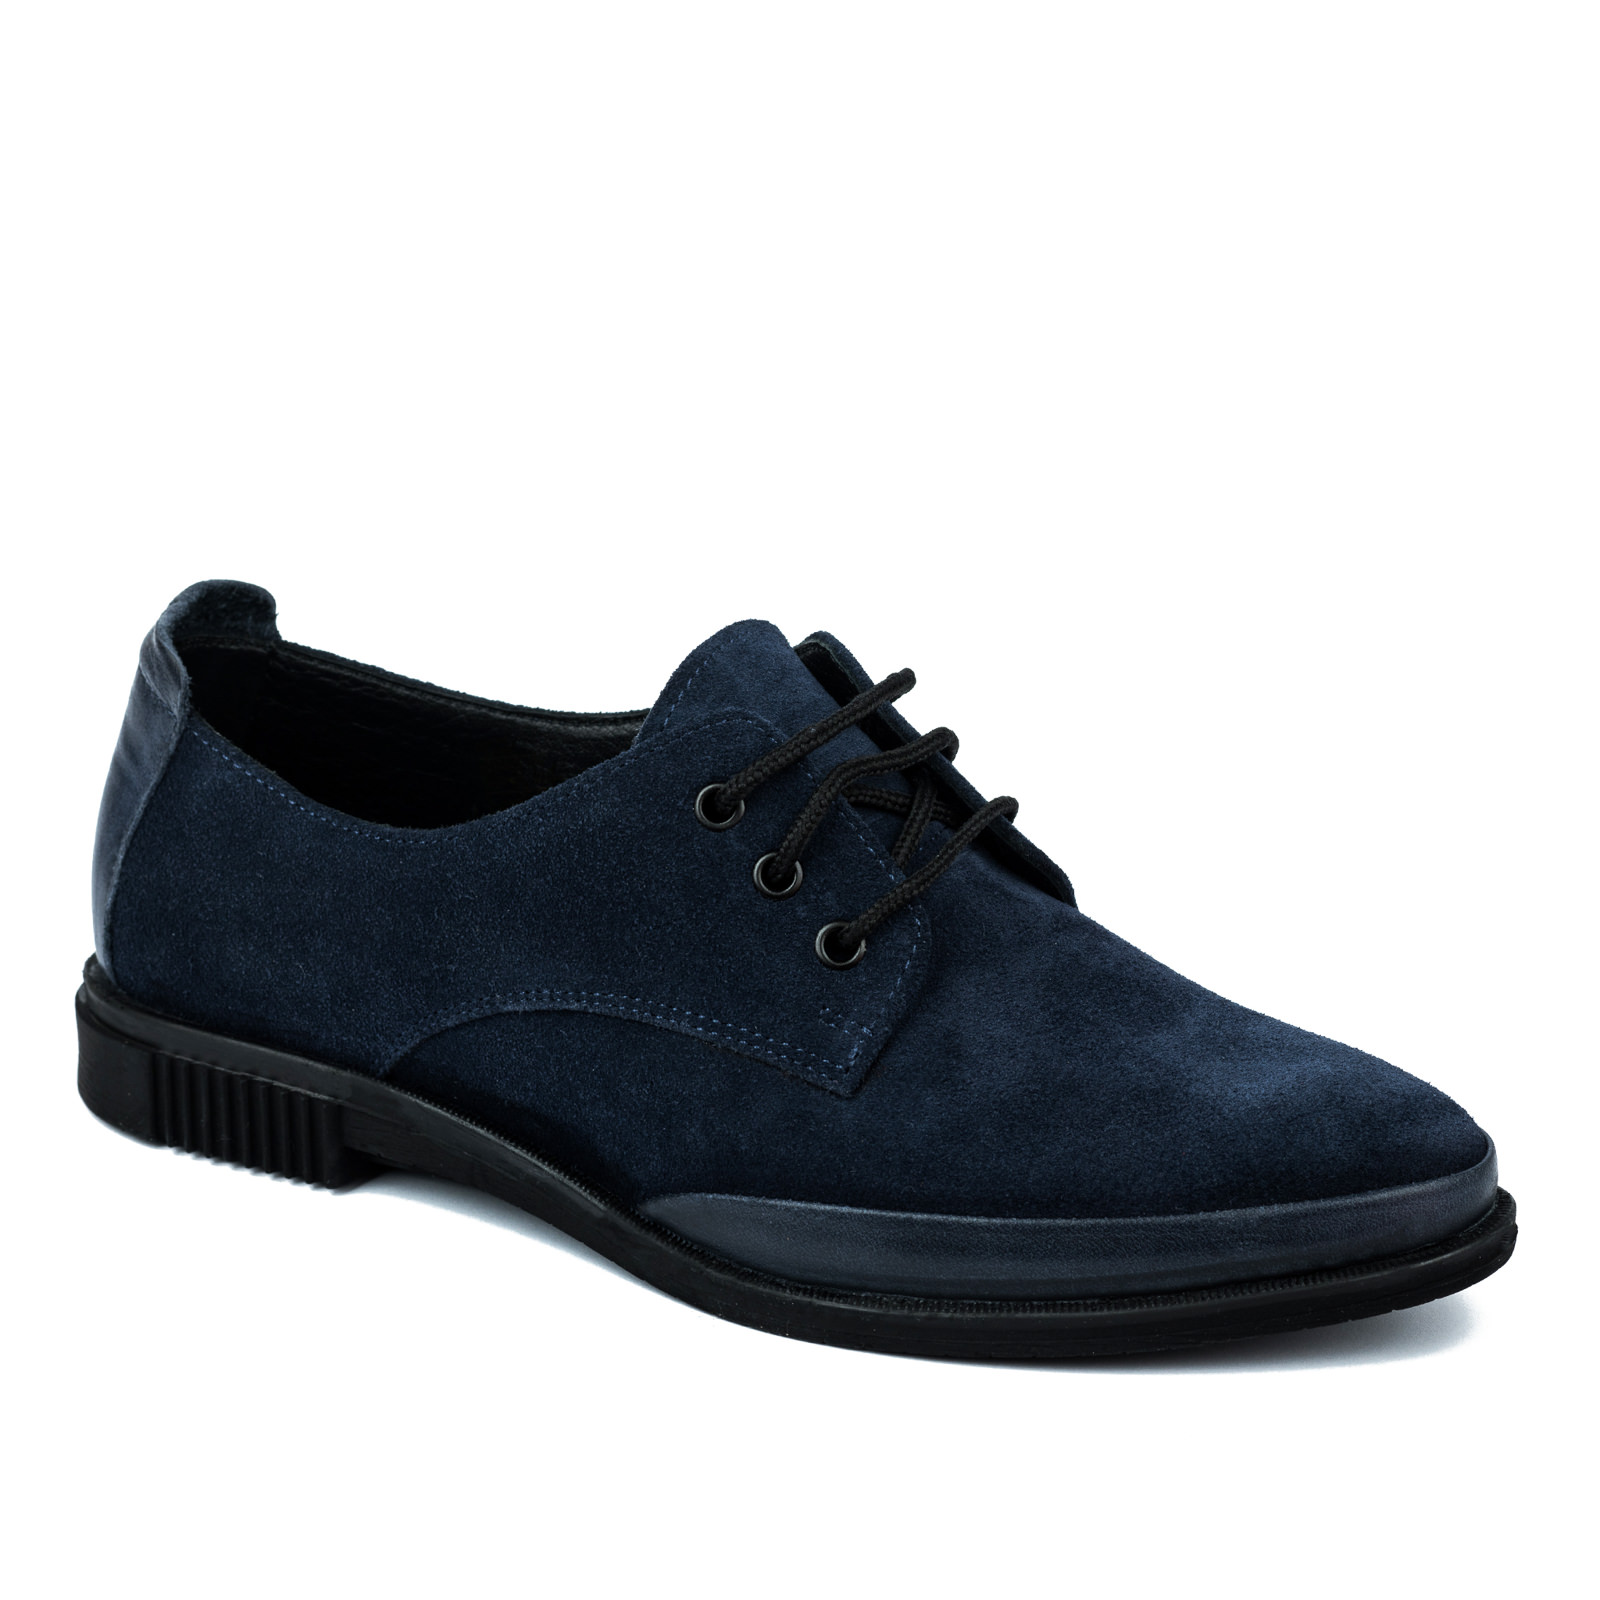 Leather shoes & flats B014 - NAVY